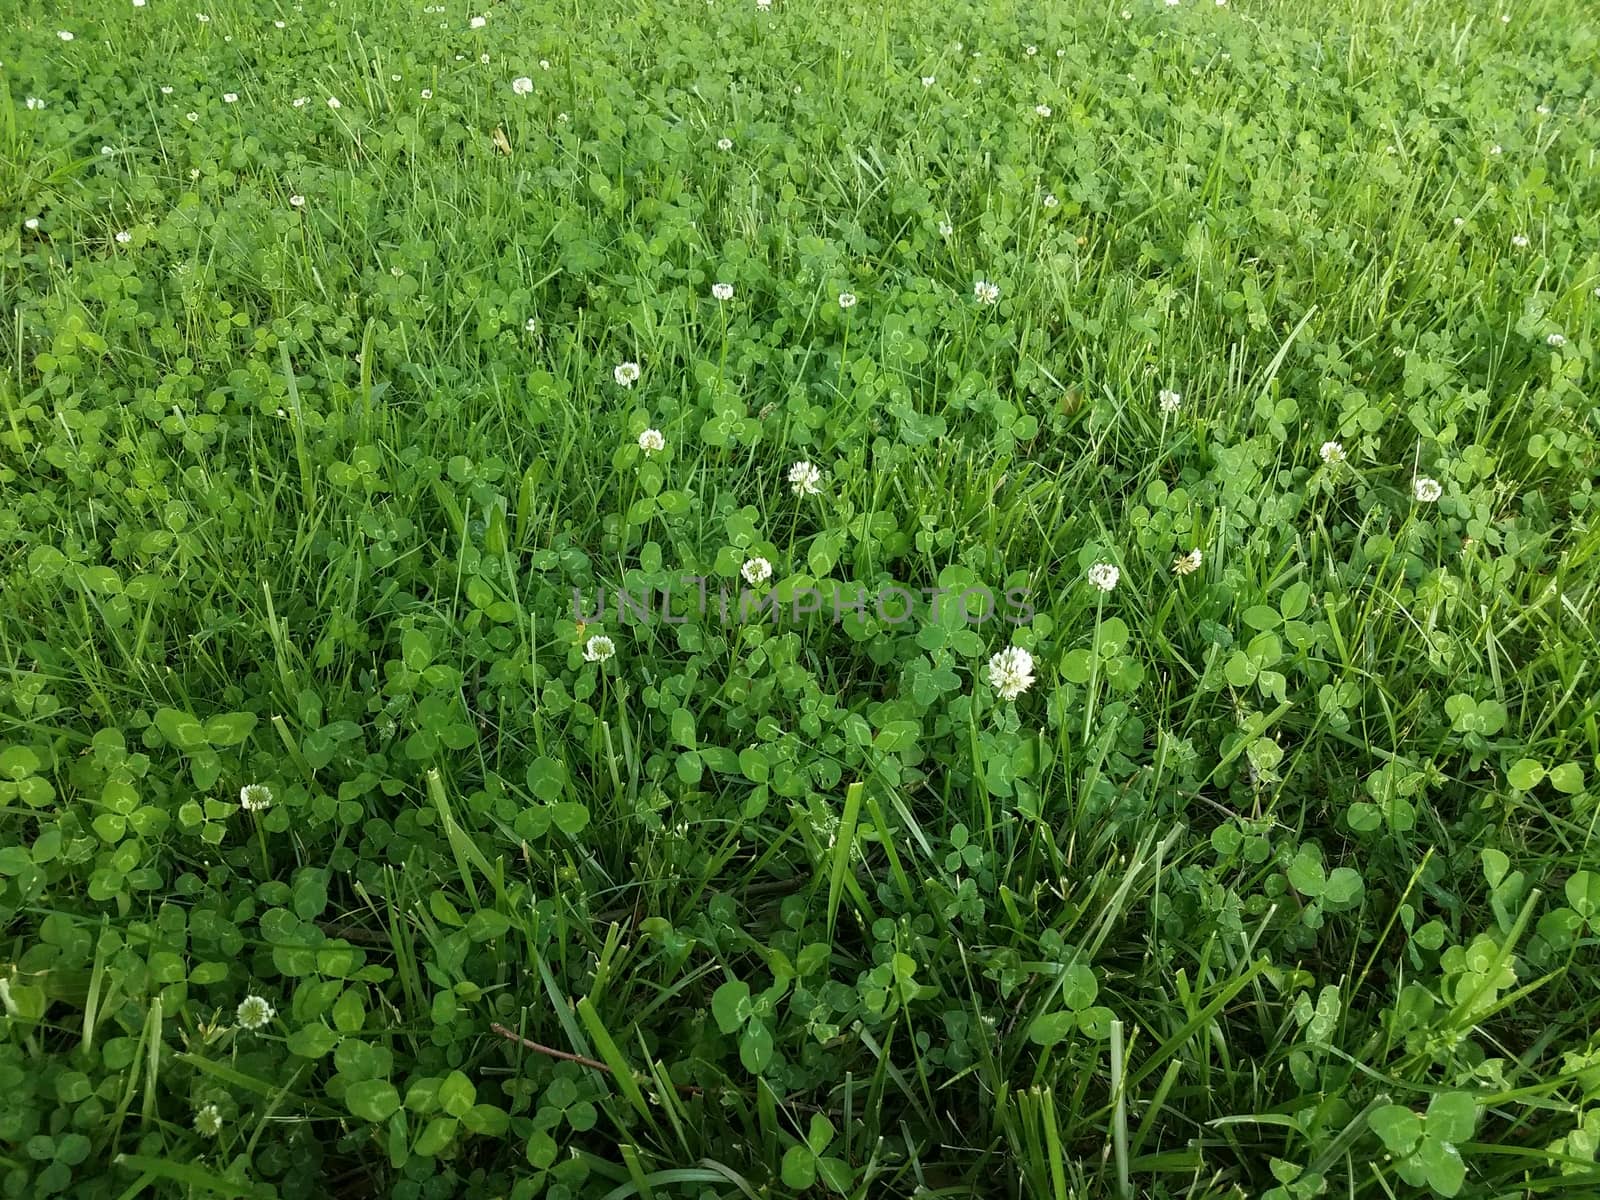 clover weeds and green grass in the lawn or yard